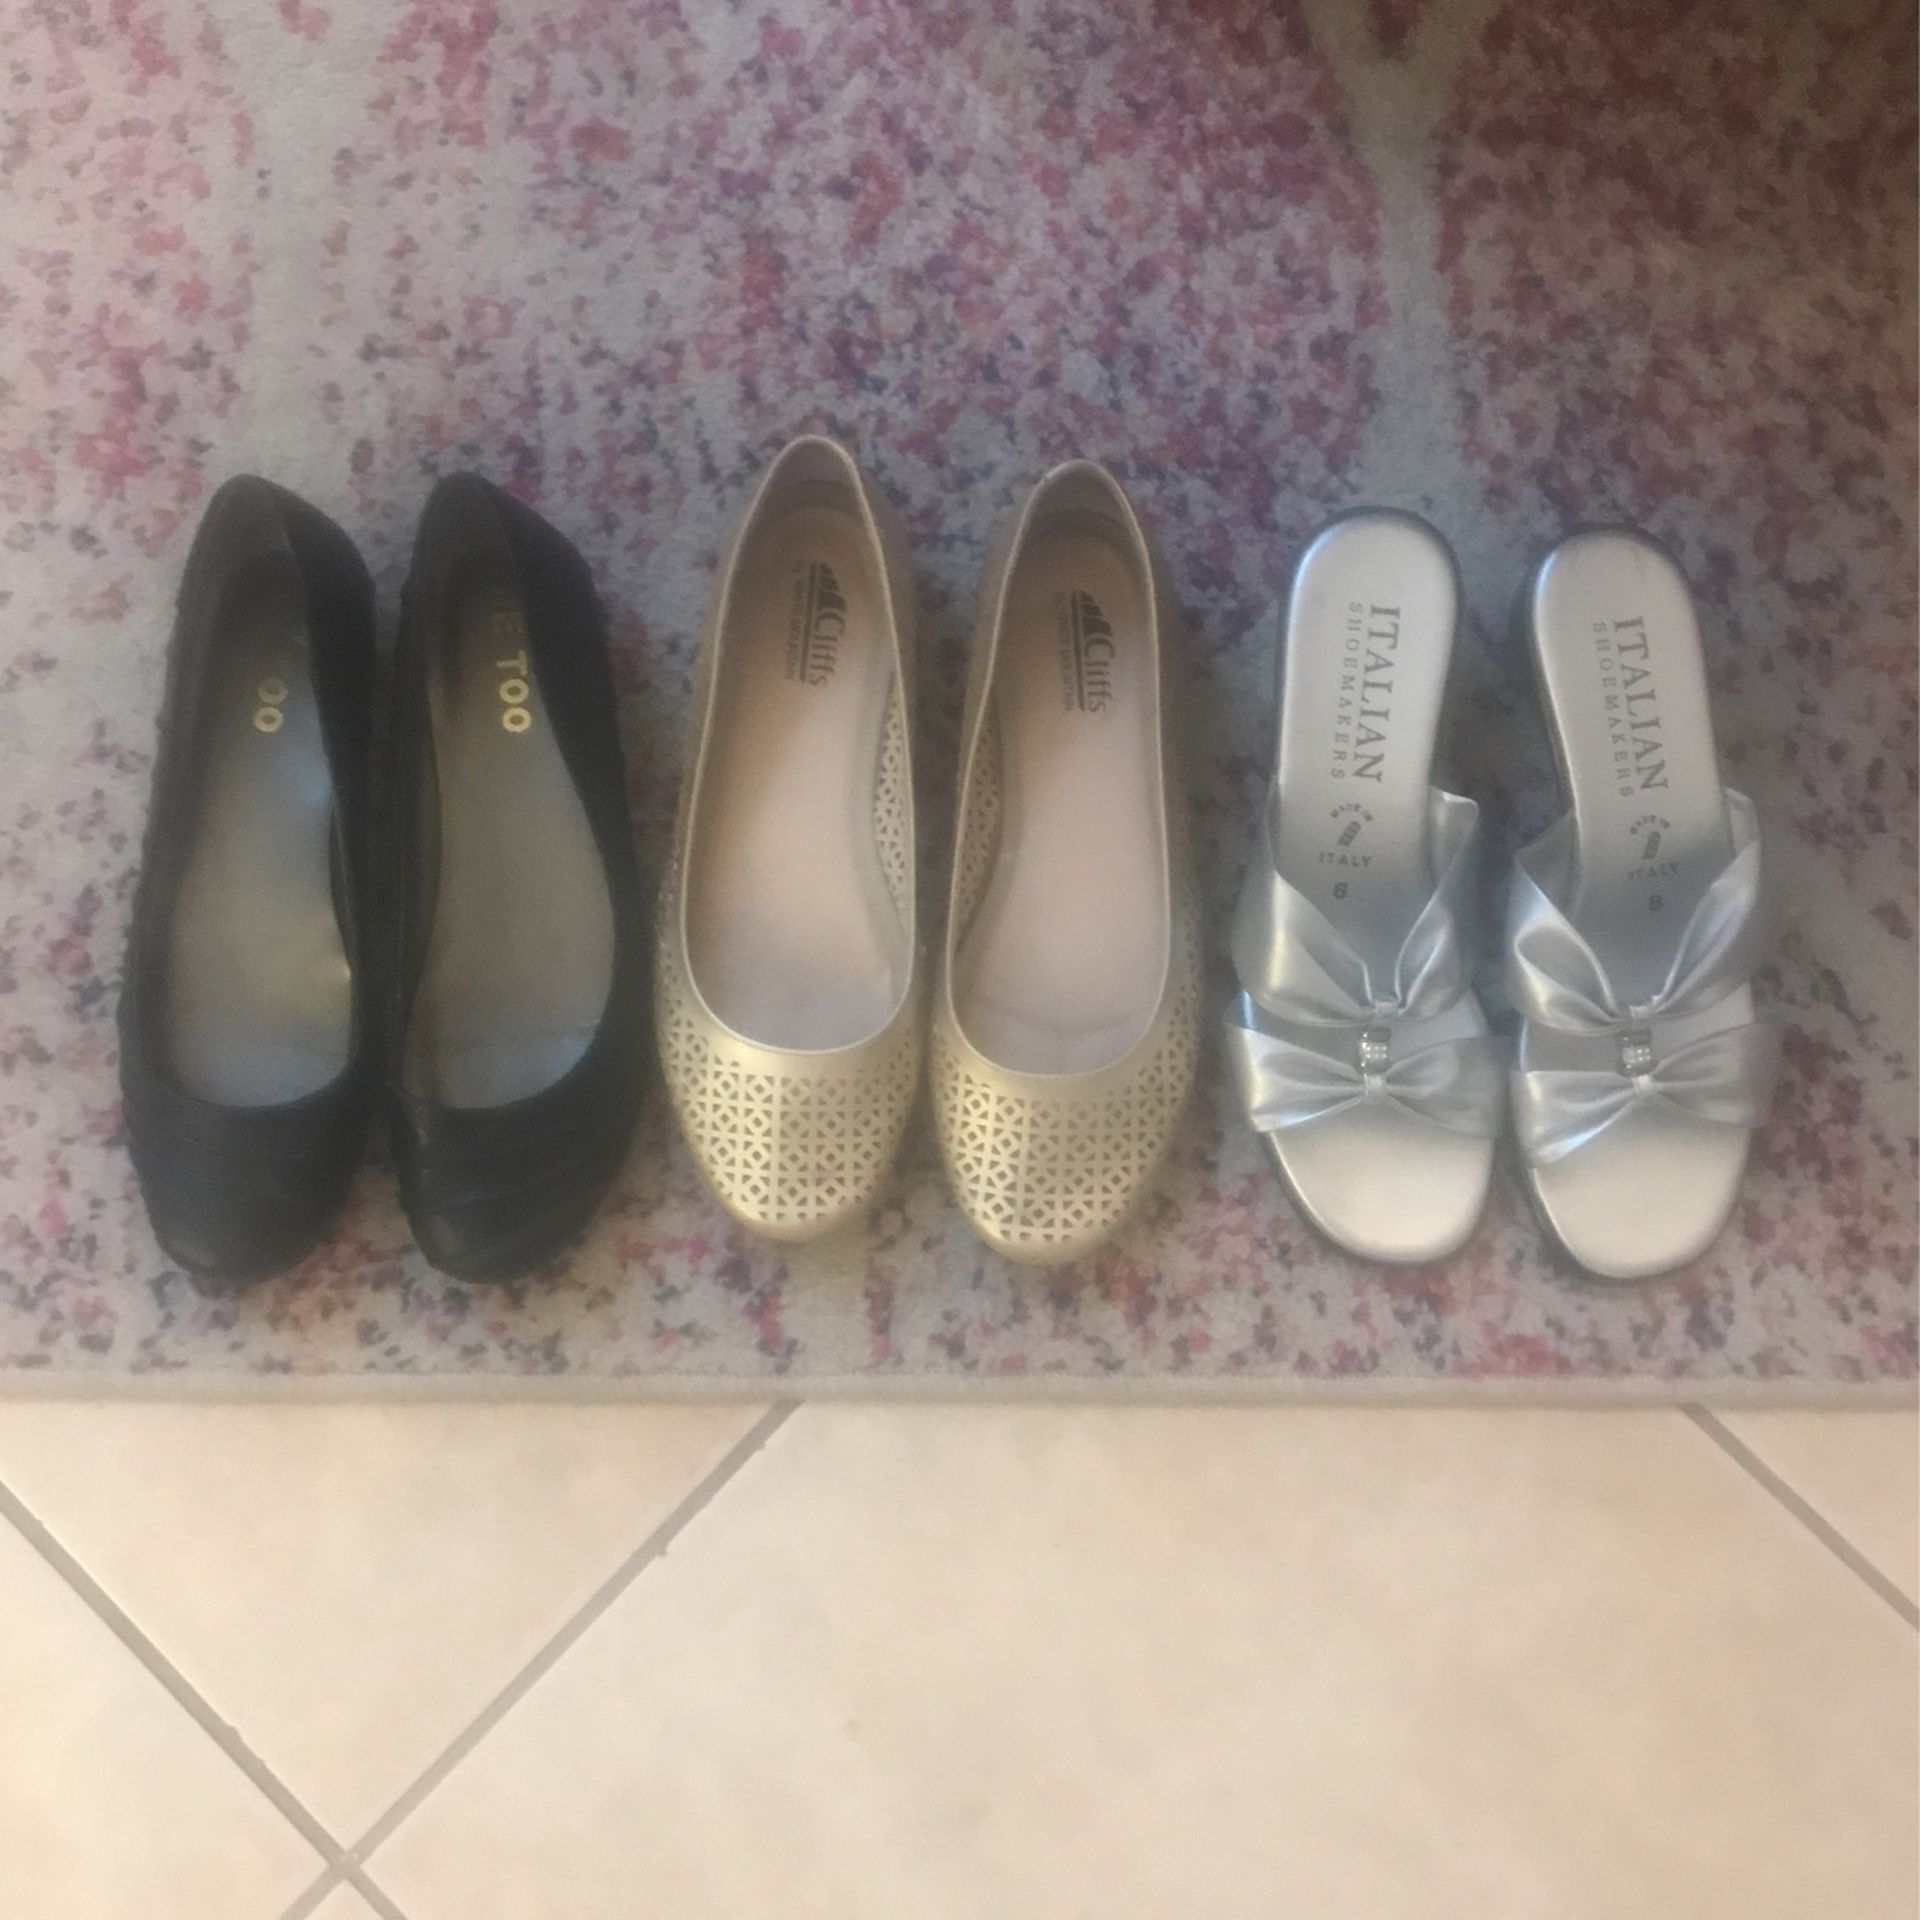 3 Pairs Size 8 Woman’s Shoes In Excellent Condition 